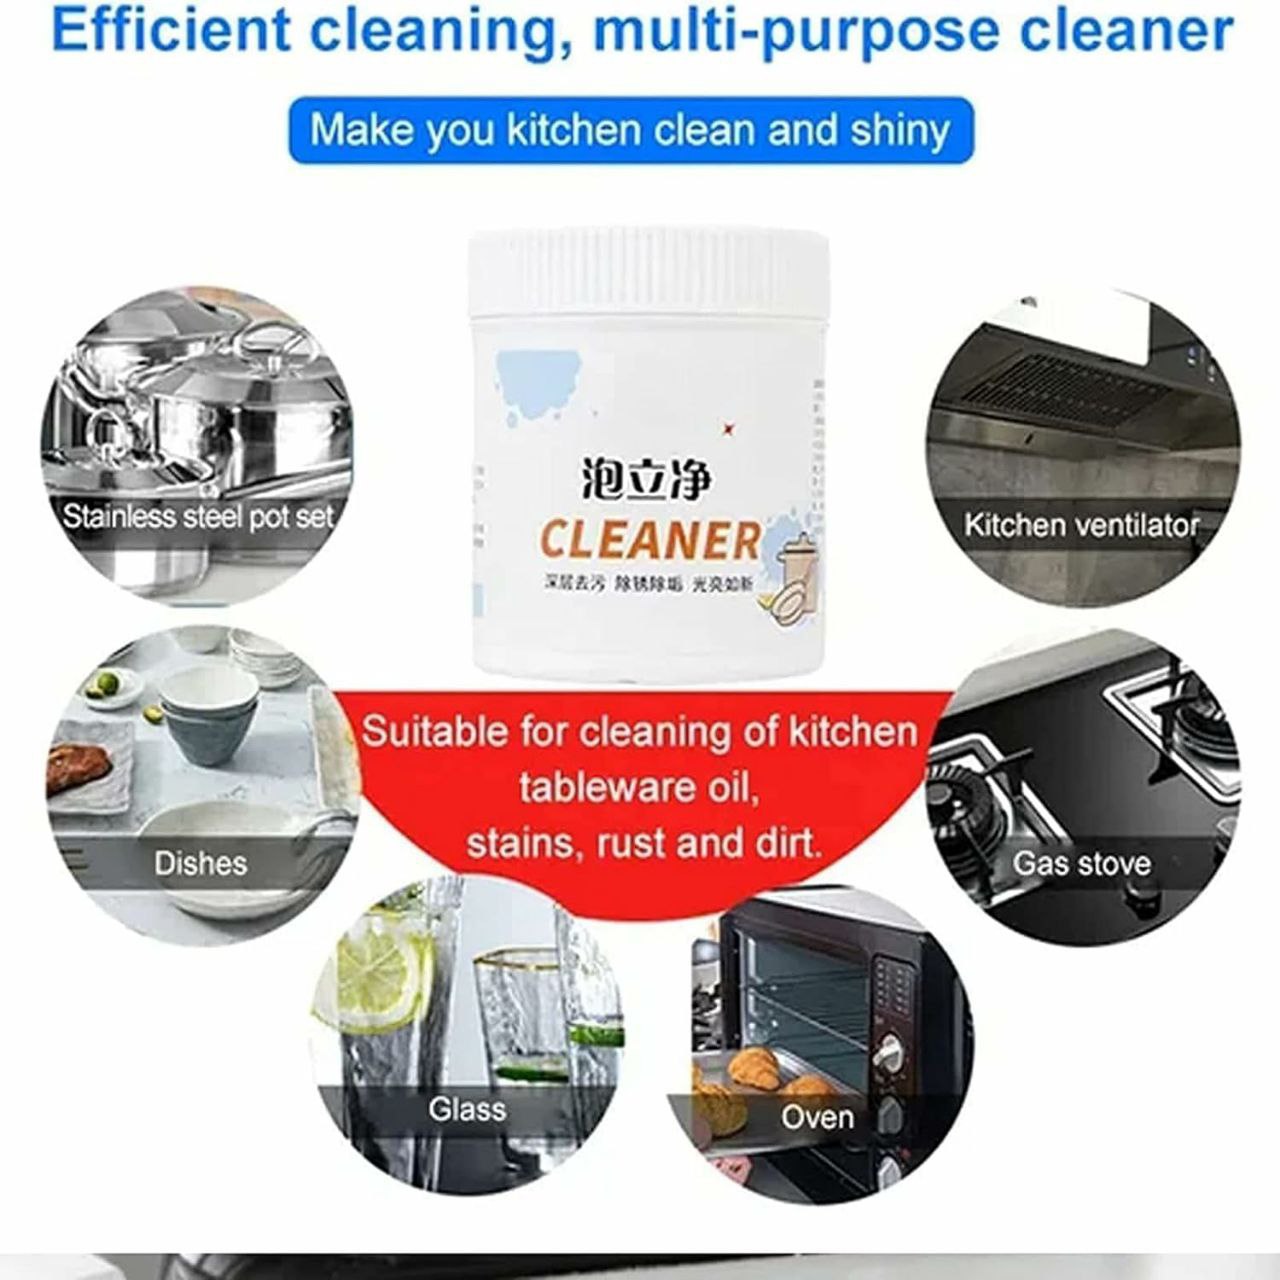 Restore Shine and Hygiene with Foam Rust Remover